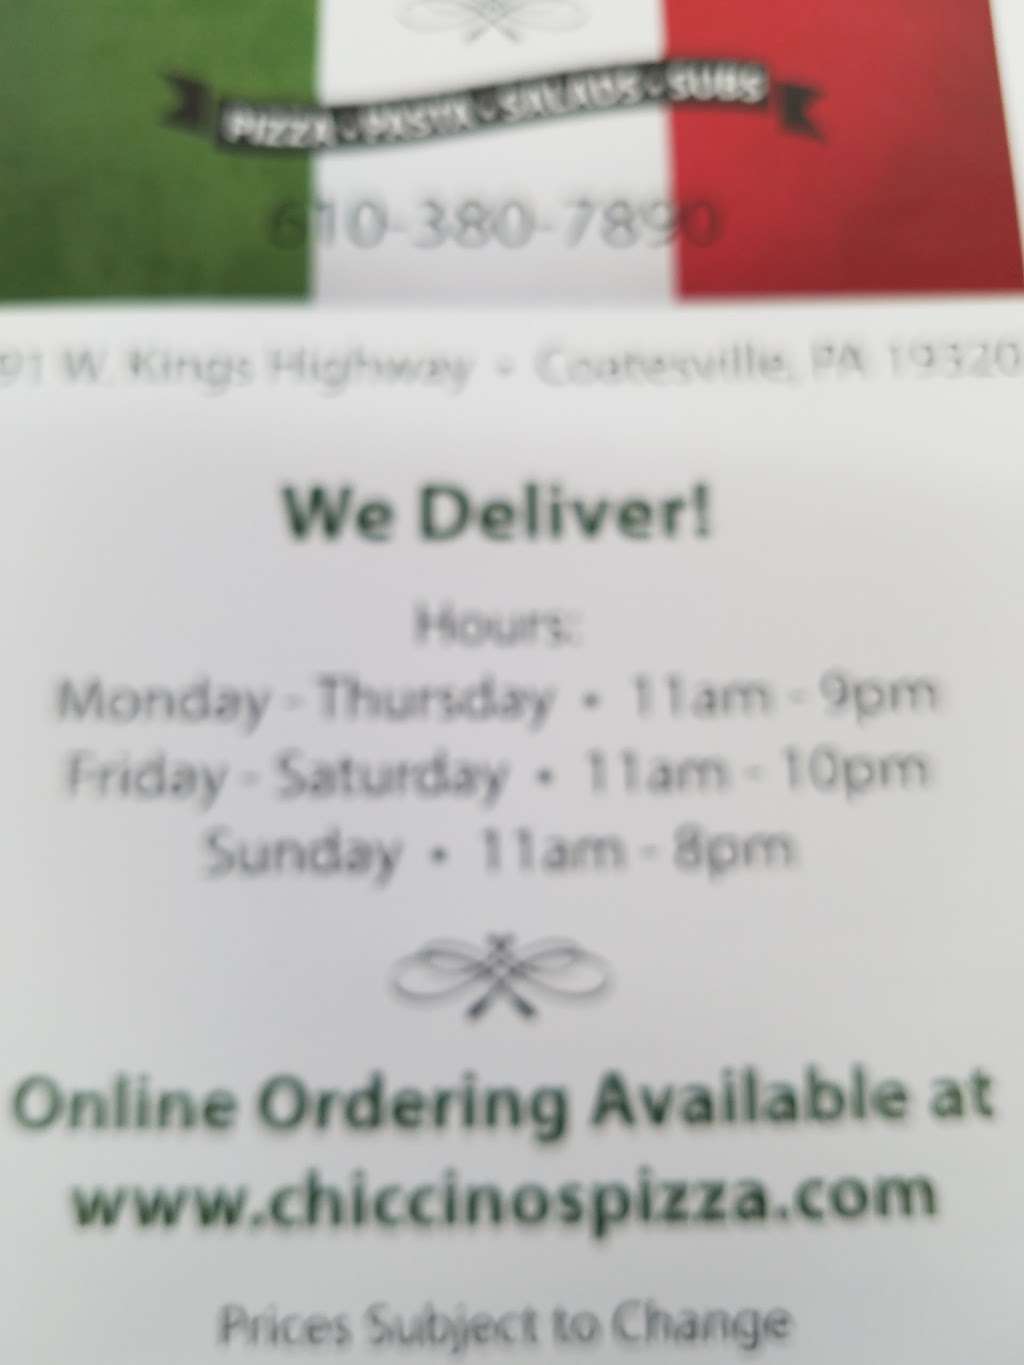 Chiccinos Pizza | 691 W Kings Hwy, Coatesville, PA 19320, USA | Phone: (610) 380-7890